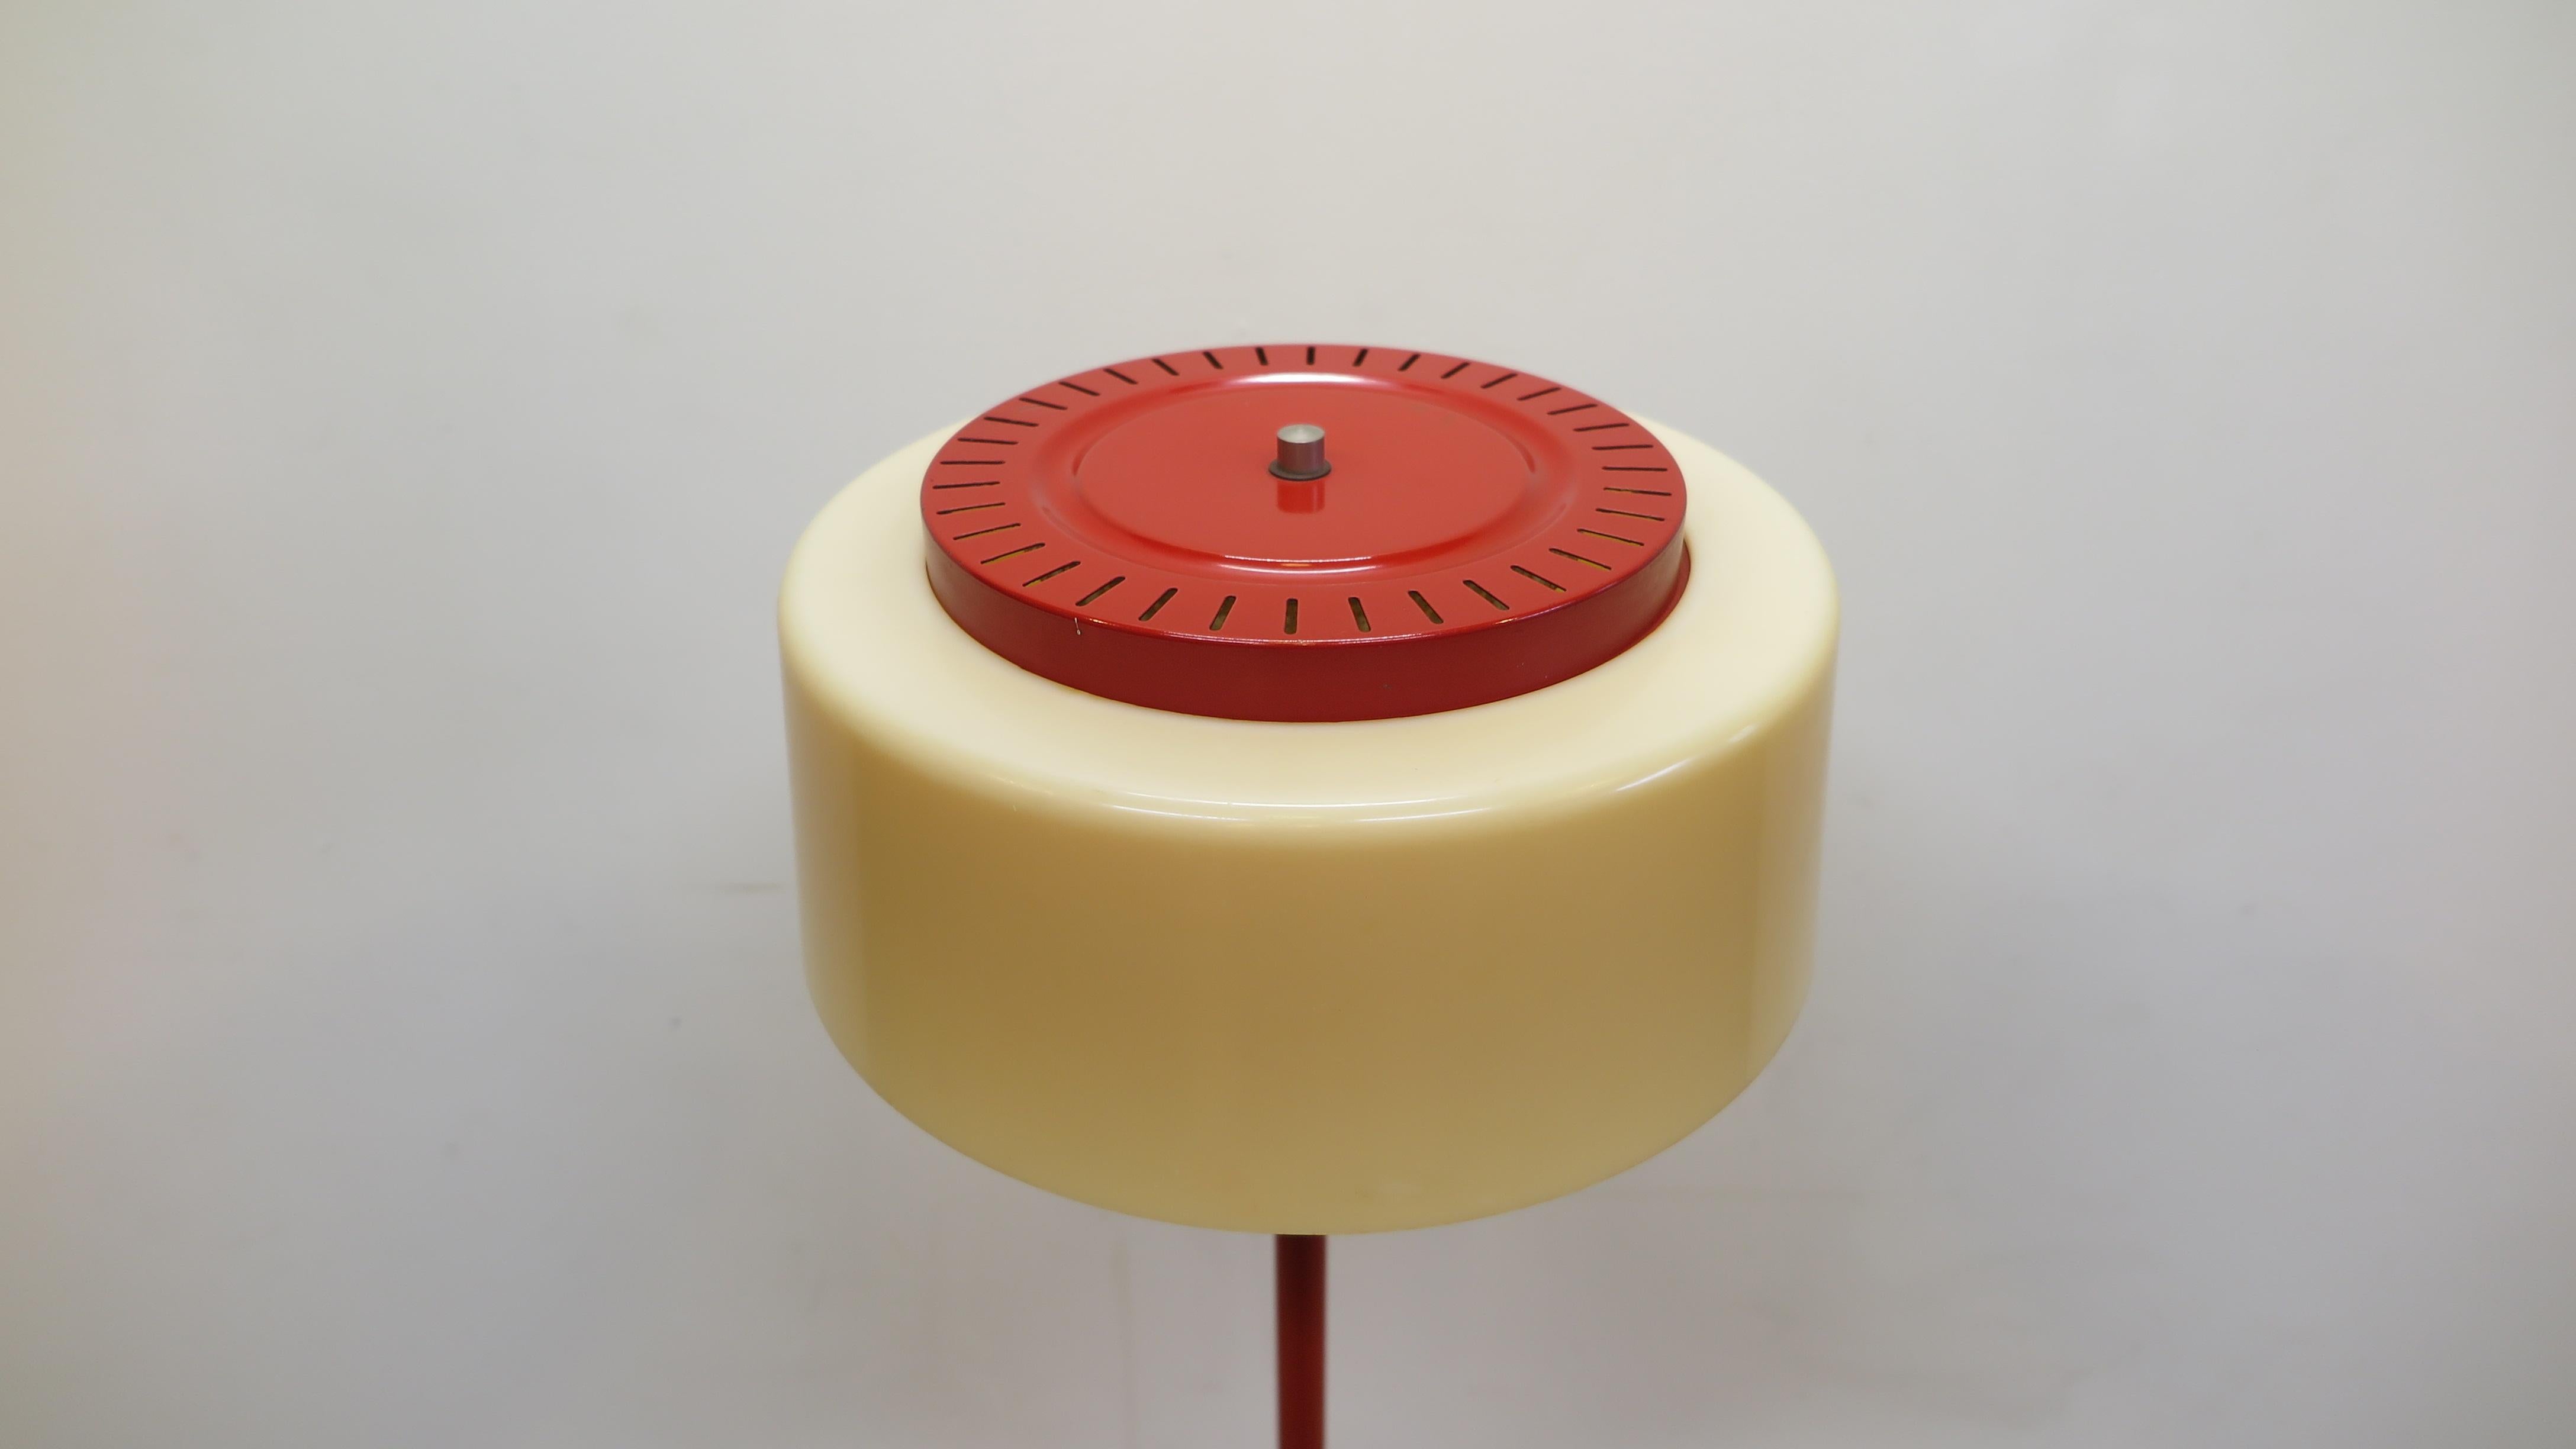 Mid Century Modern mobilite floor lamp. Mobilite Inc. NY, American atomic industrial modernist floor lamp. Red metal pole, base and diffuser with acrylic shade in good working condition. Age appropriate wear, scratches to the paint, acrylic shade in